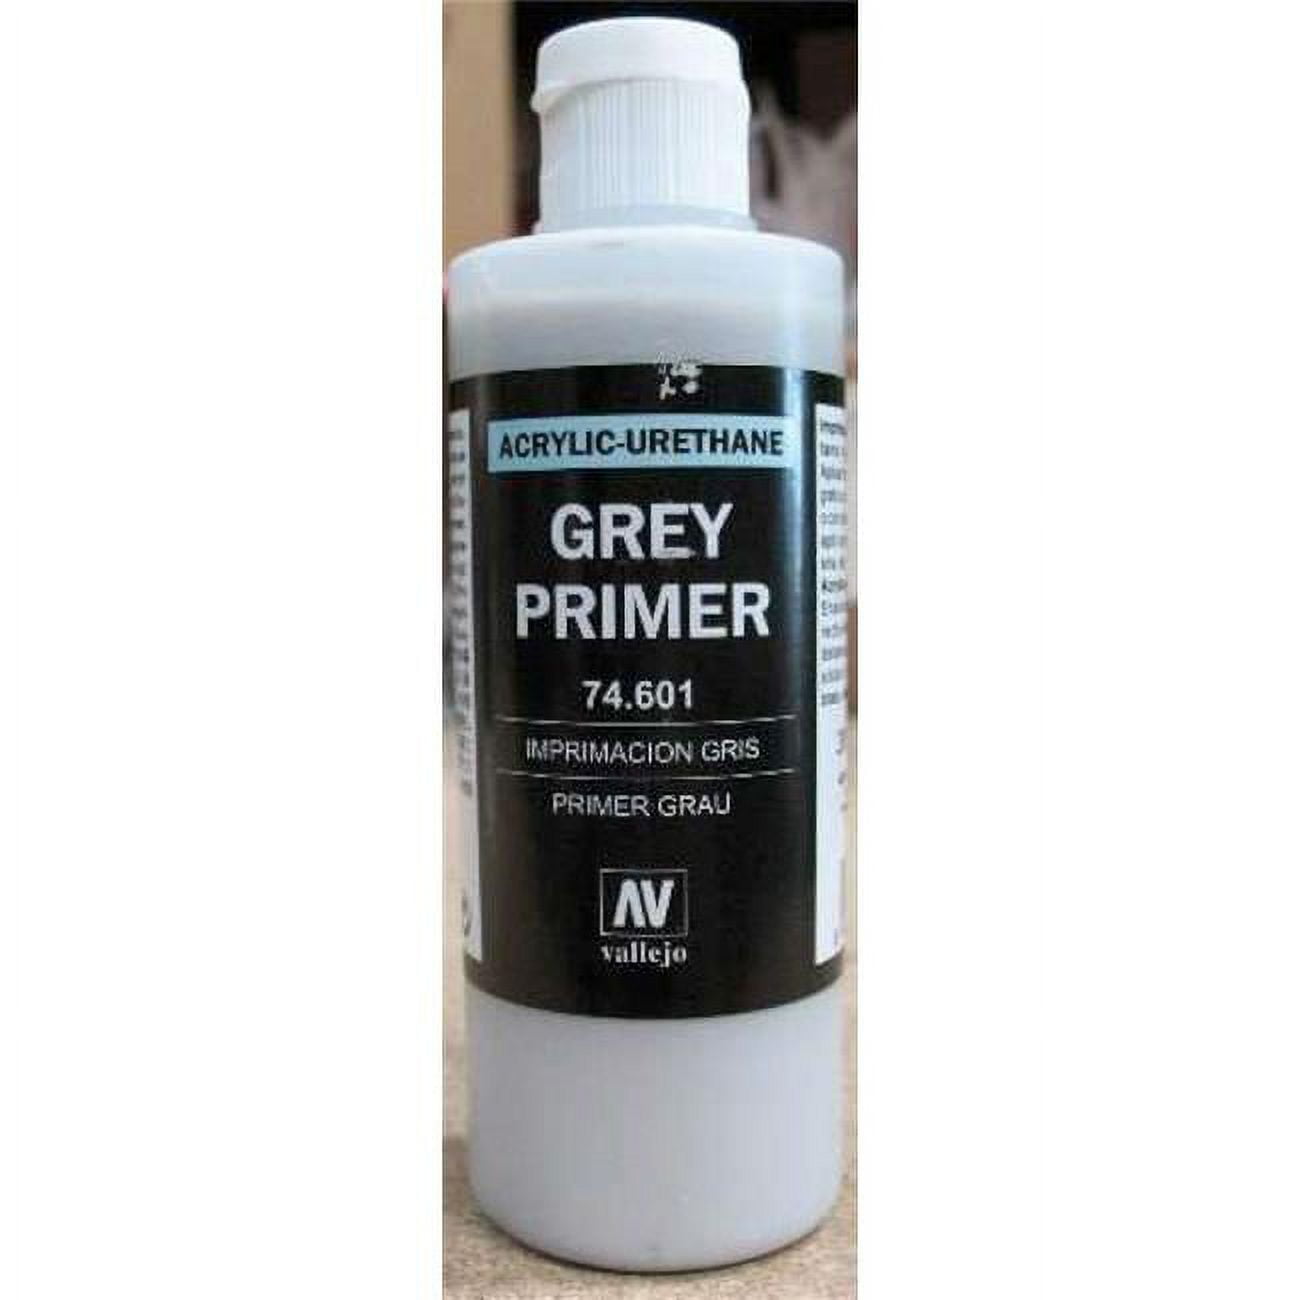 Acrylicos Vallejo VJP70624 Game Air Pure Red Surface Primer Paint 